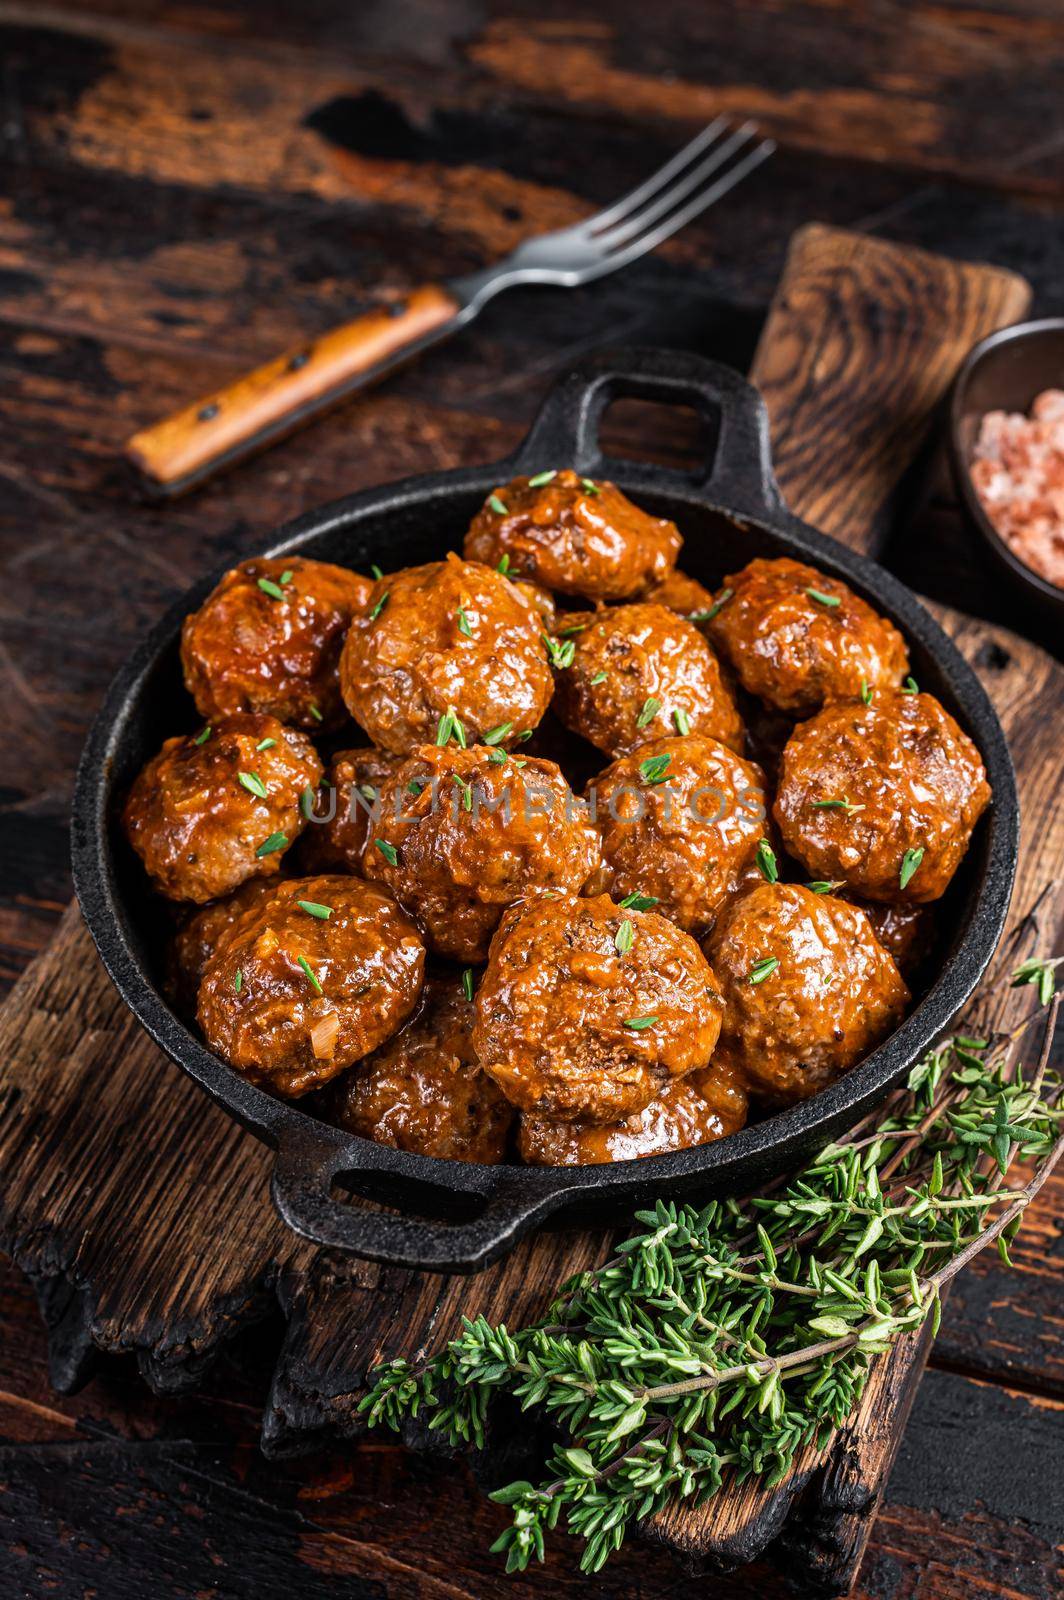 Meatballs in tomato sauce from beef and pork meat with thyme in rustic pan. Dark background. Top view by Composter